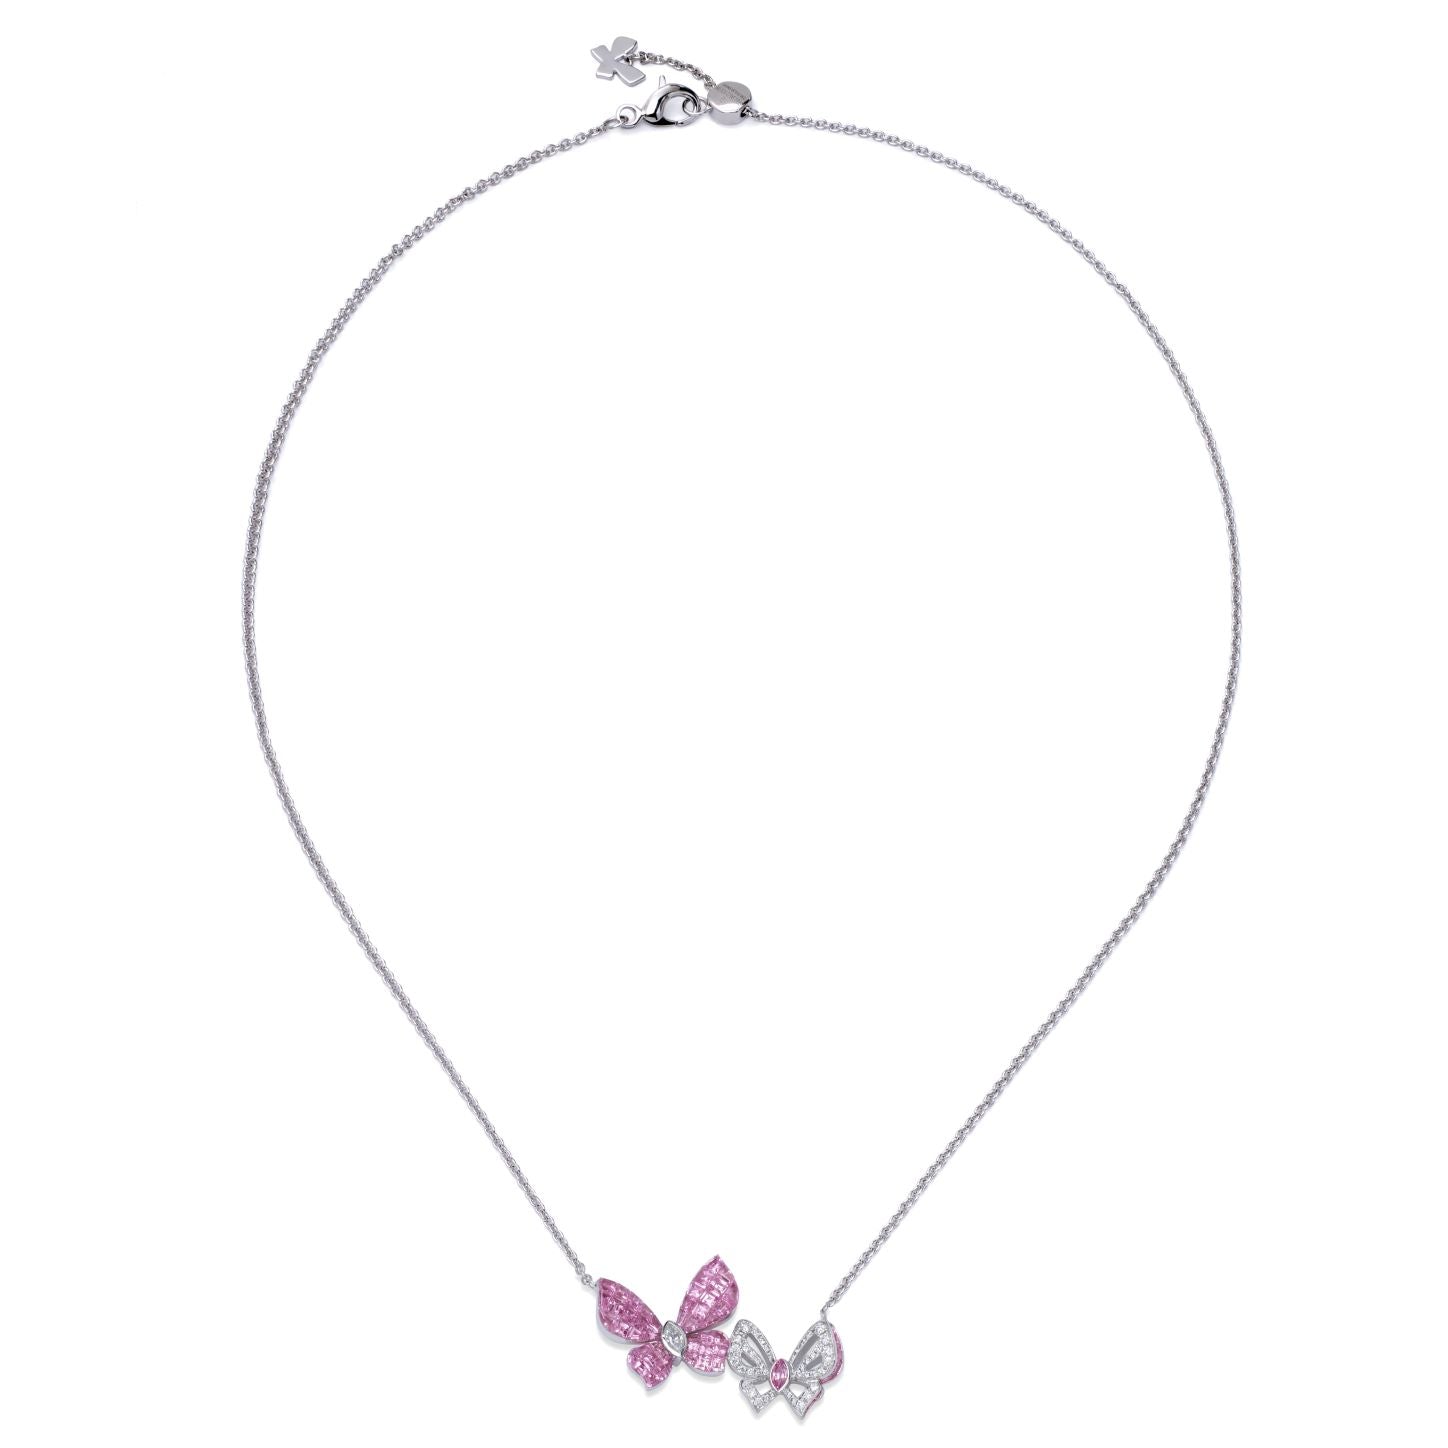 MADEMOISELLE B. Pink Sapphire Necklace